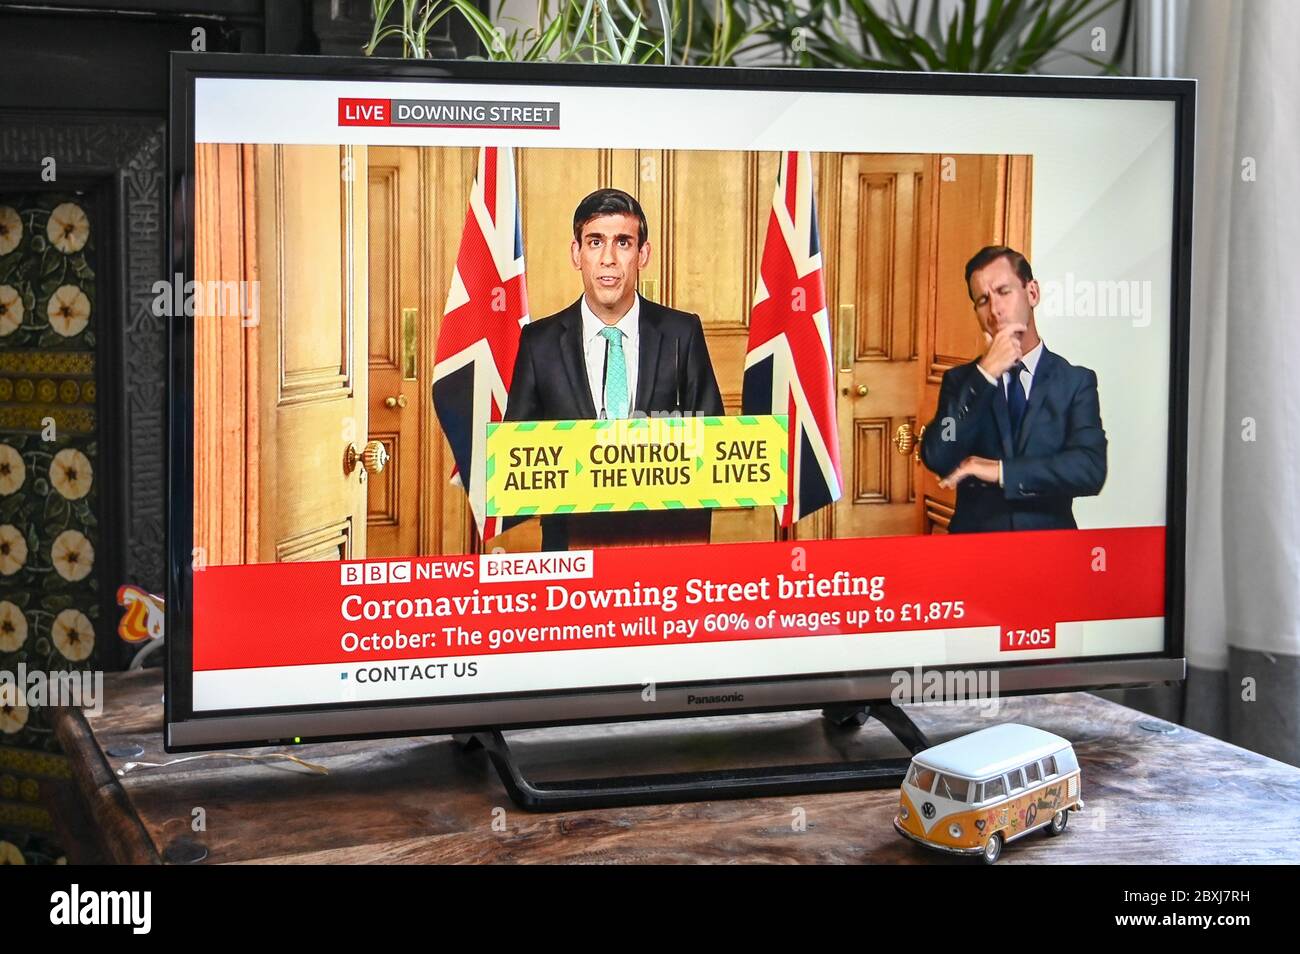 The daily Coronavirus briefing from Downing Street with Rishi Sunak, Chancellor of the Exchequer with 'Stay Alert, Control the Virus' message. Stock Photo